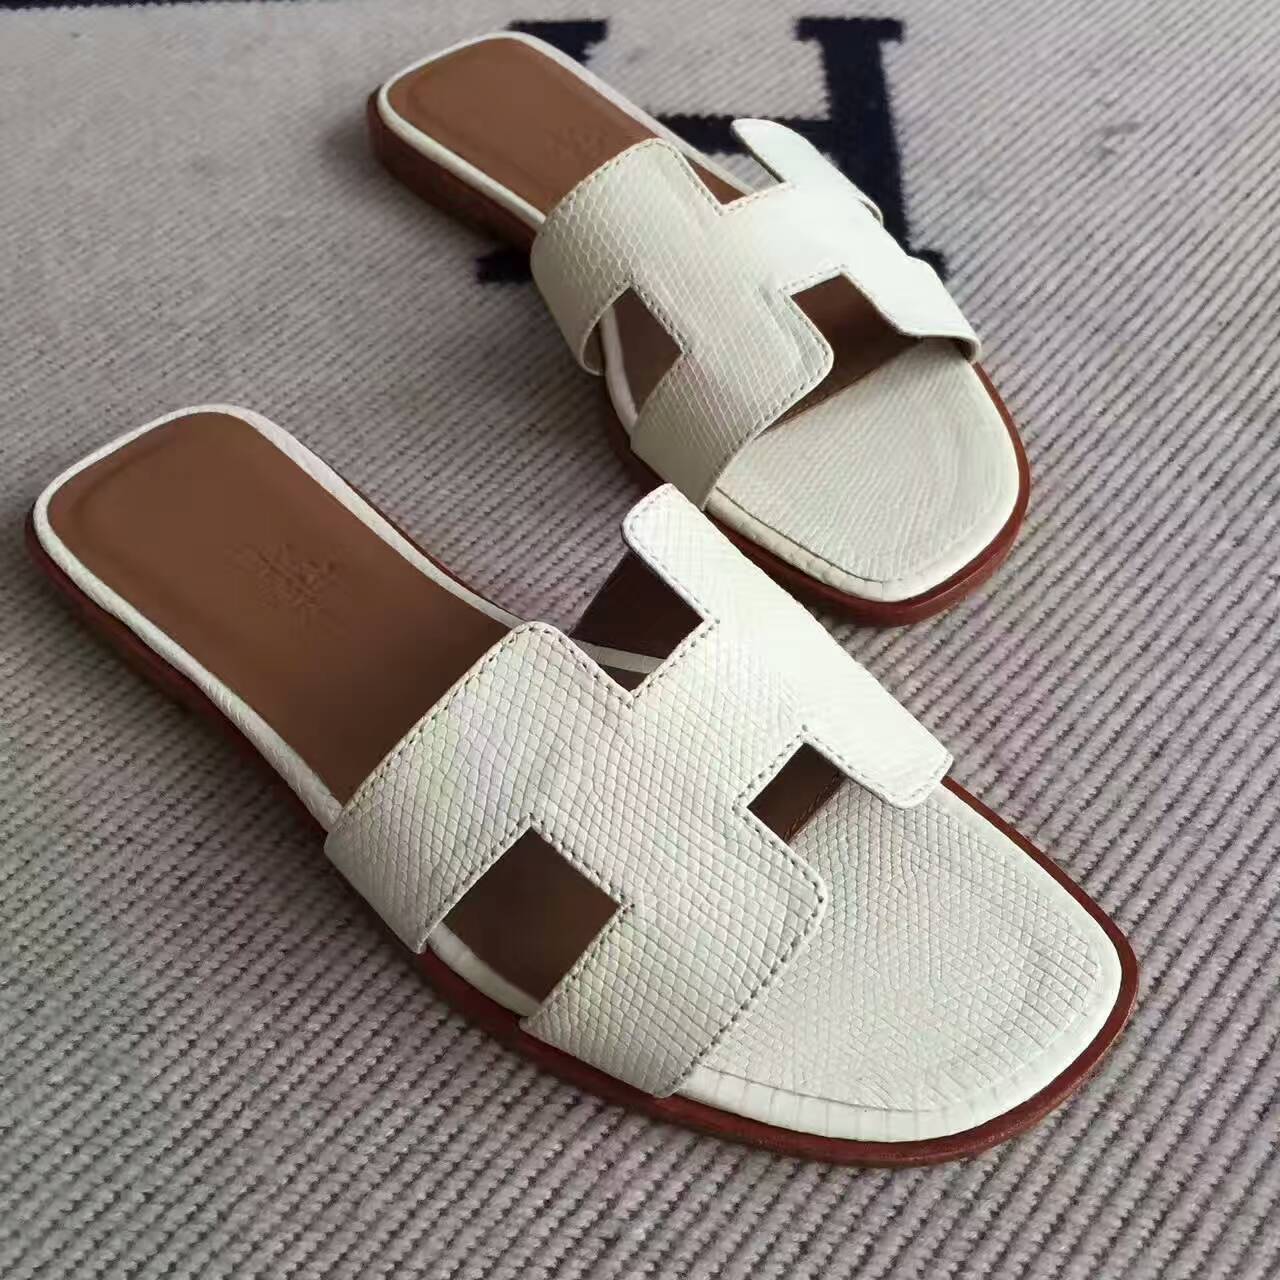 Noble Hermes White Lizard Skin Sandals Shoes Size 35-42